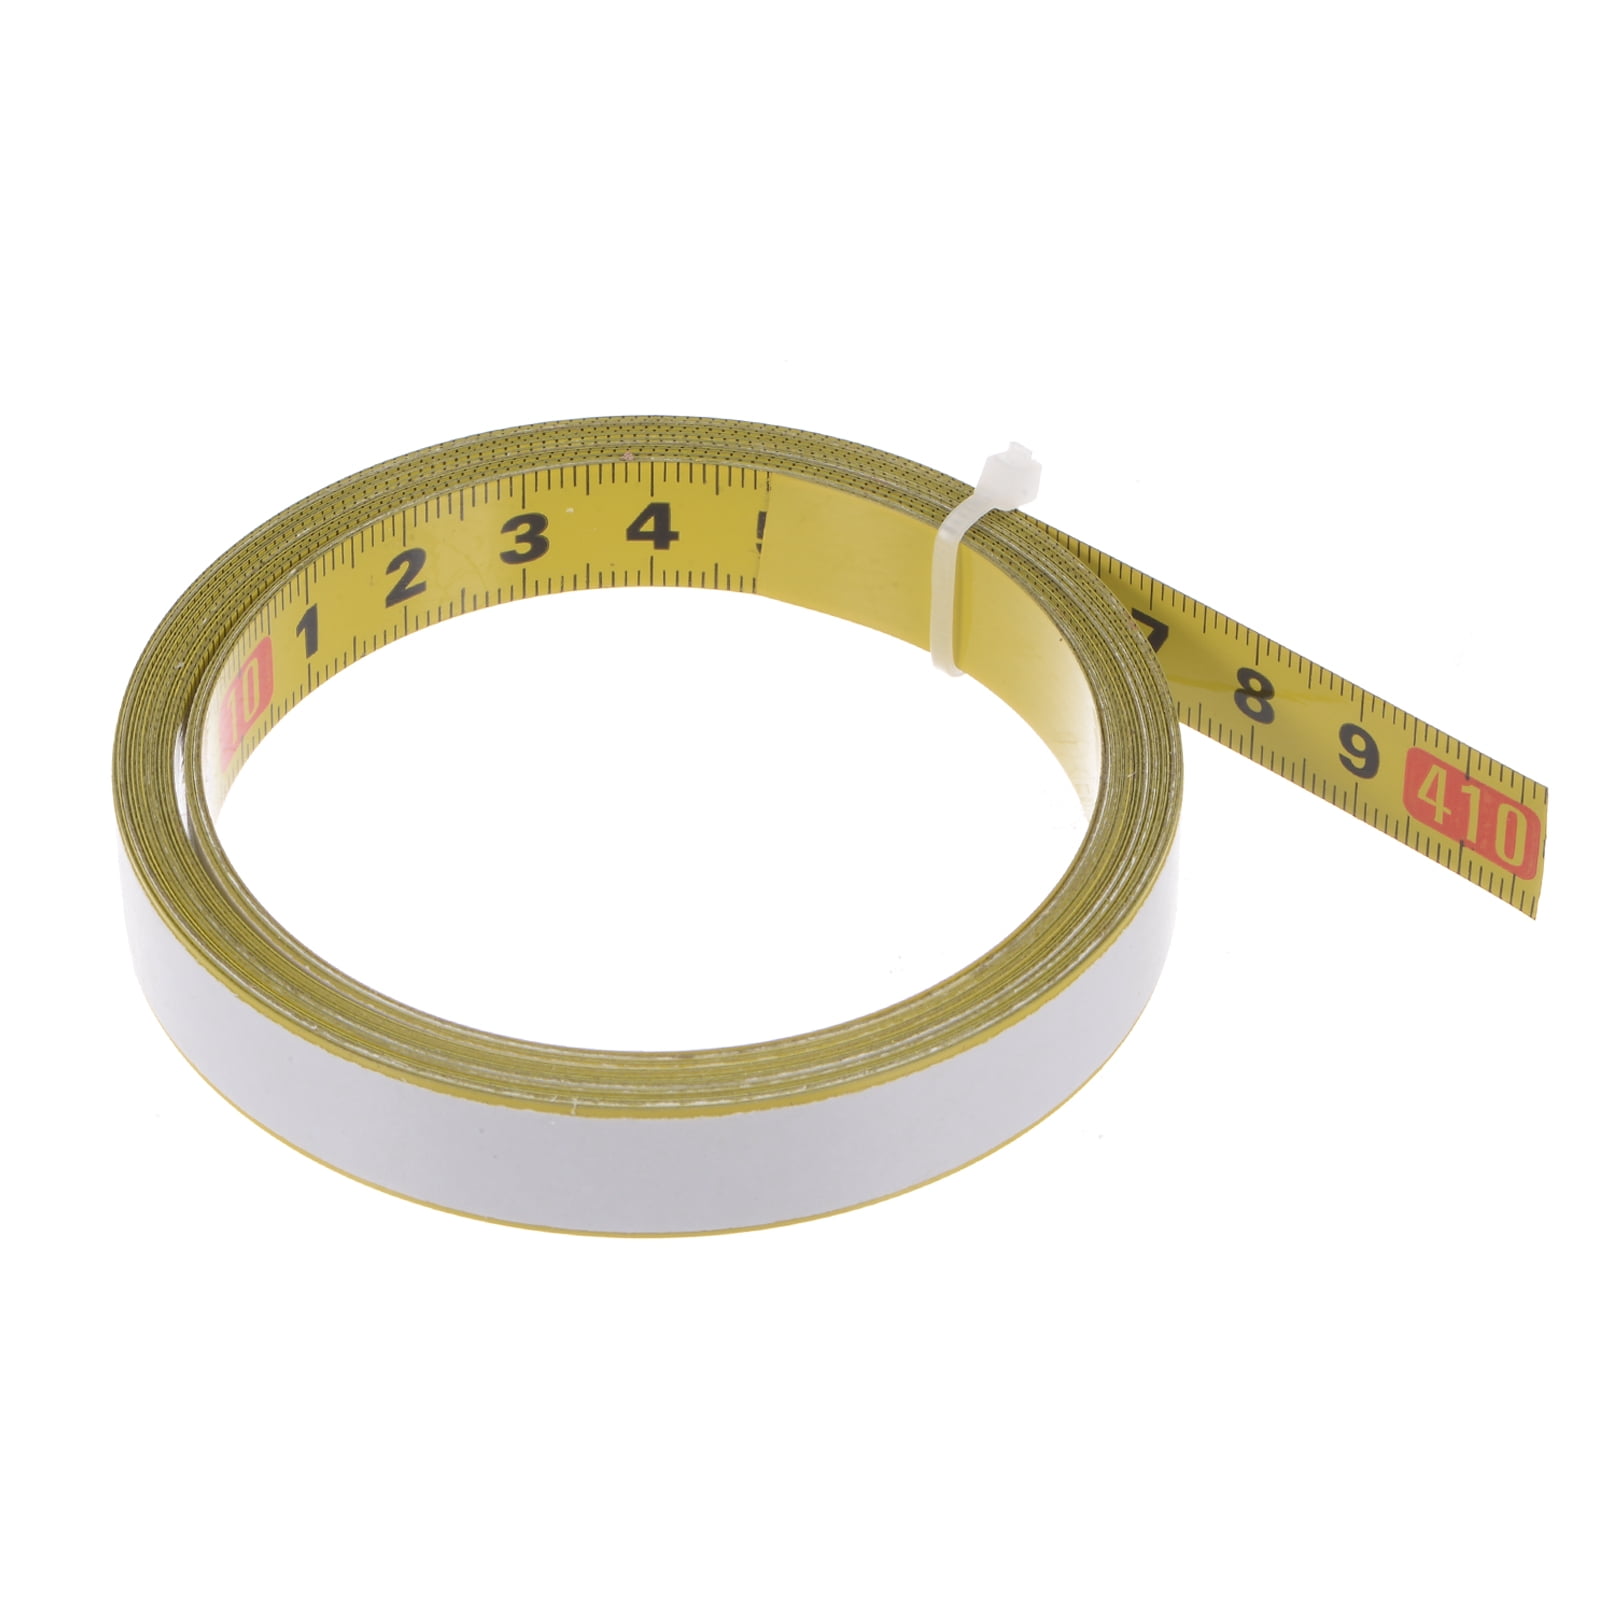 100-400cm Self-Adhesive Measuring Tape Metric Left to Right Widened  Stainless Steel Workbench Ruler Adhesive Backed Tape Measure